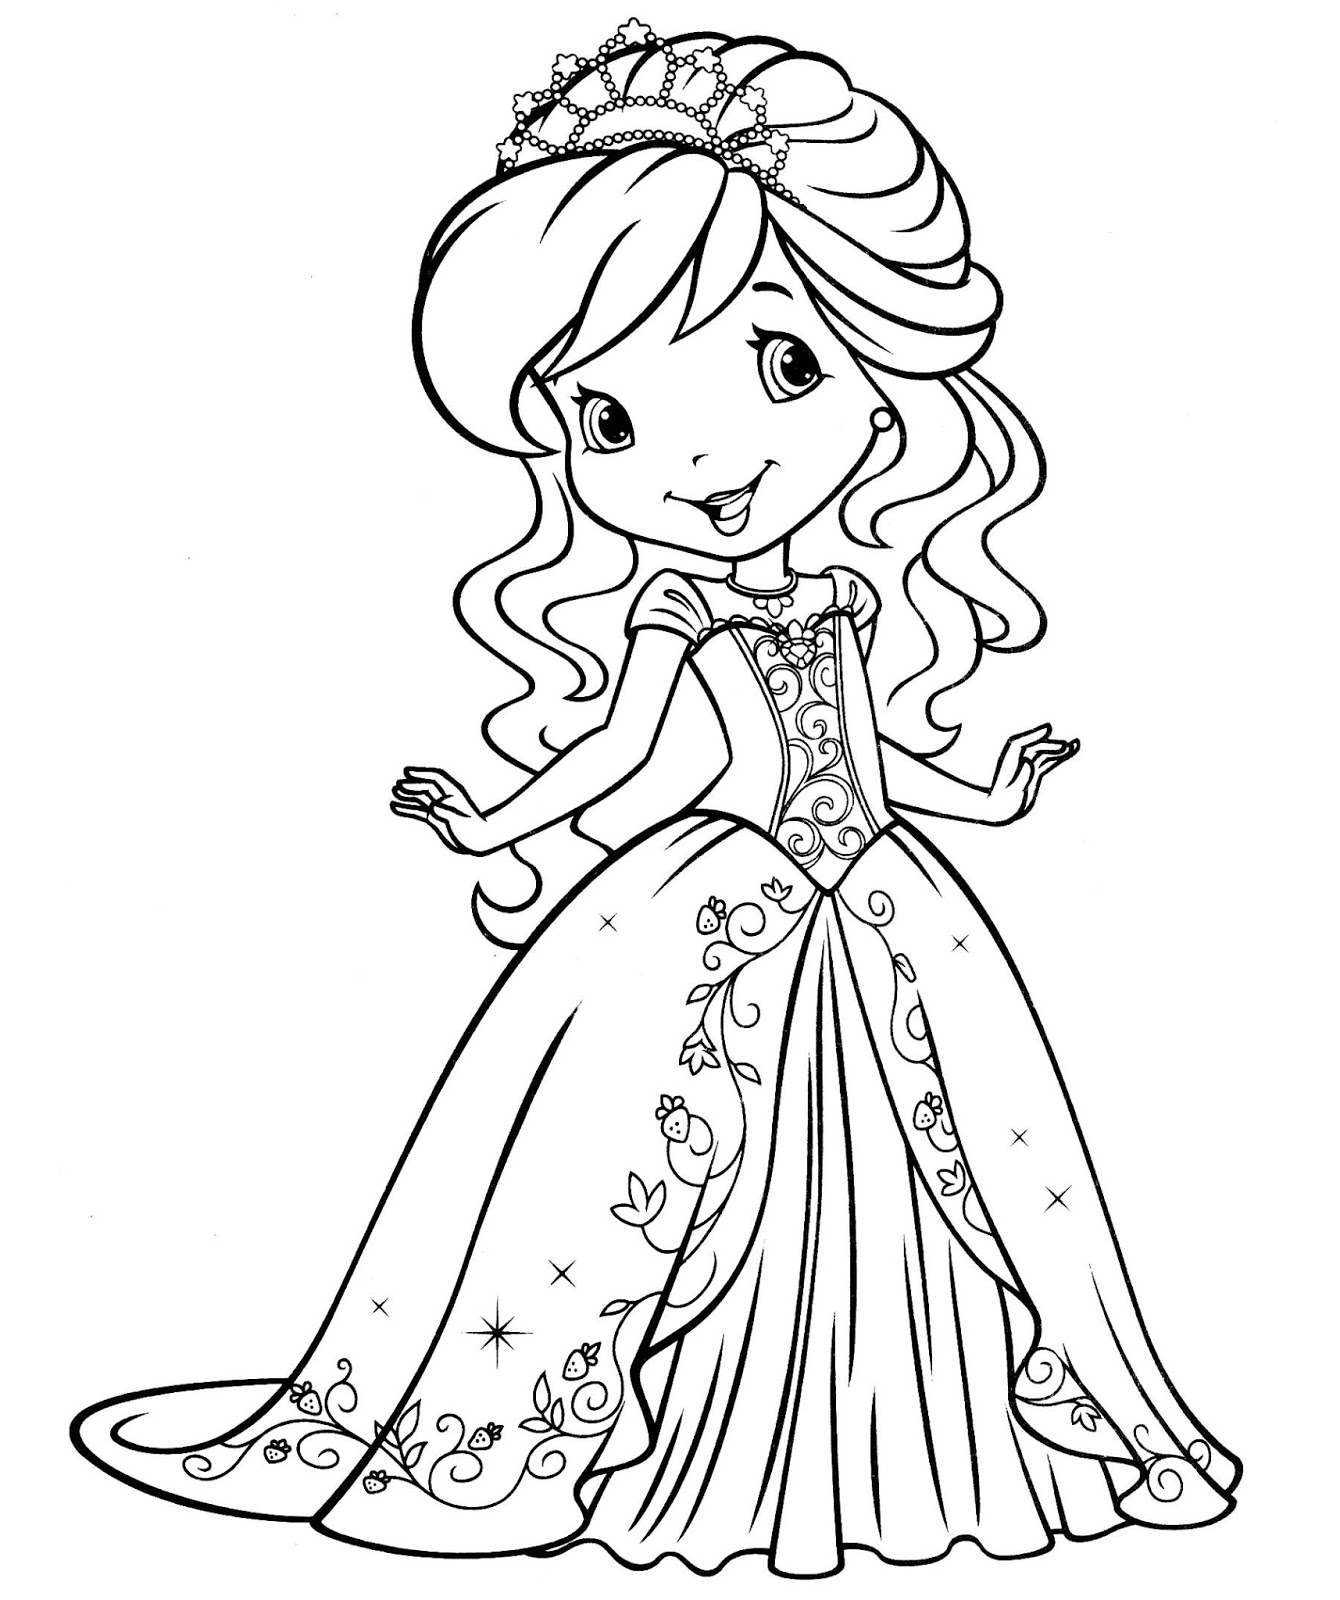 Girls Coloring Pages For Kids  Family, People and Jobs 